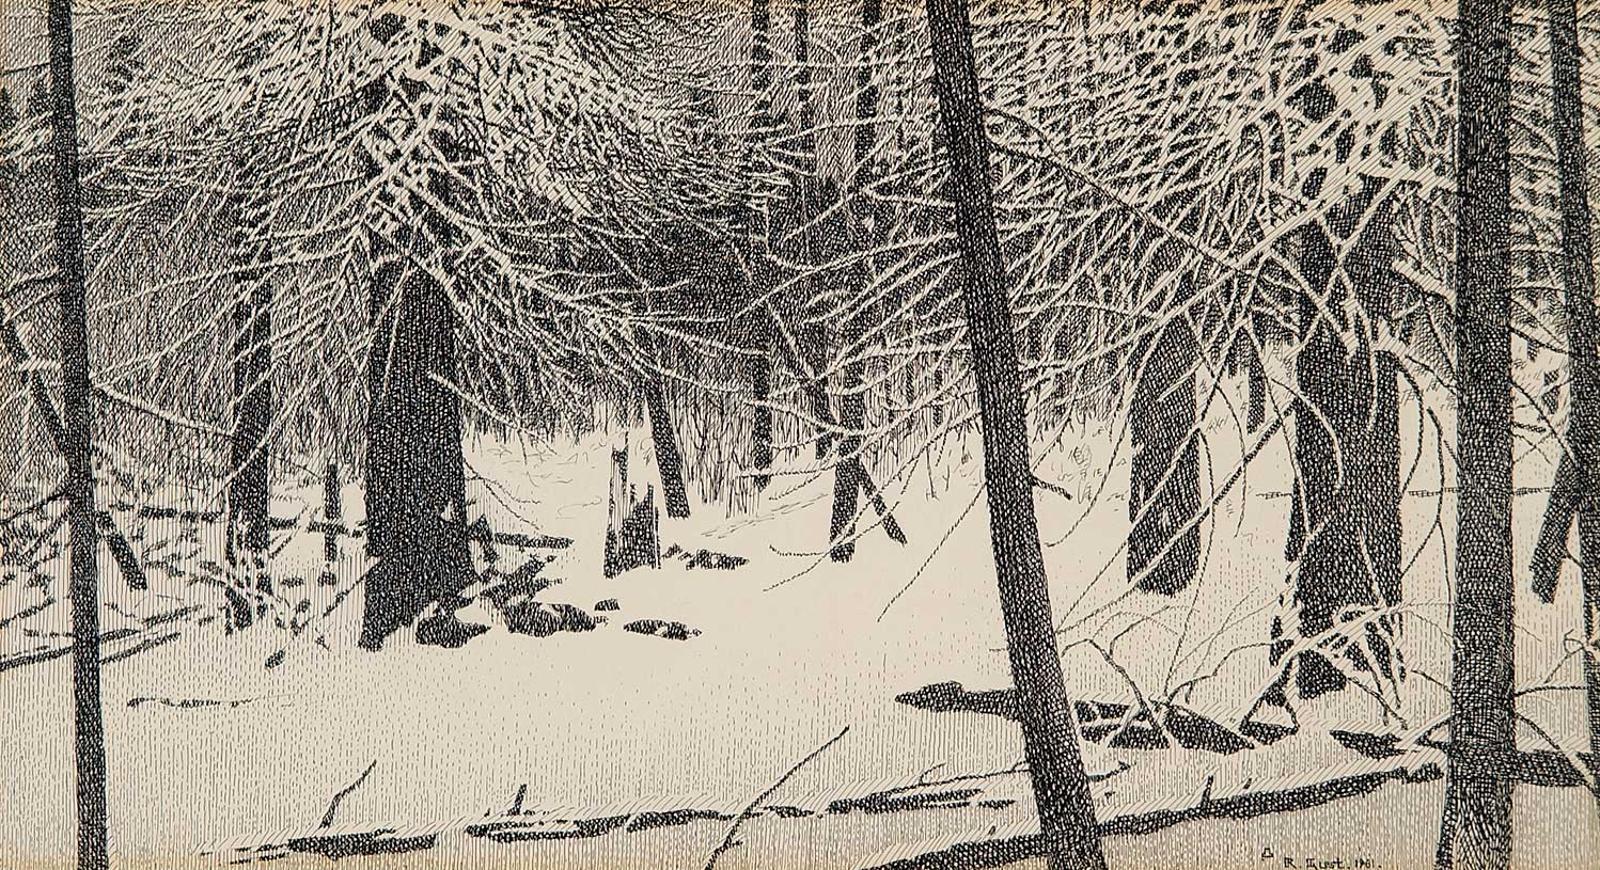 Robert Guest (1938) - Untitled - Through the Trees